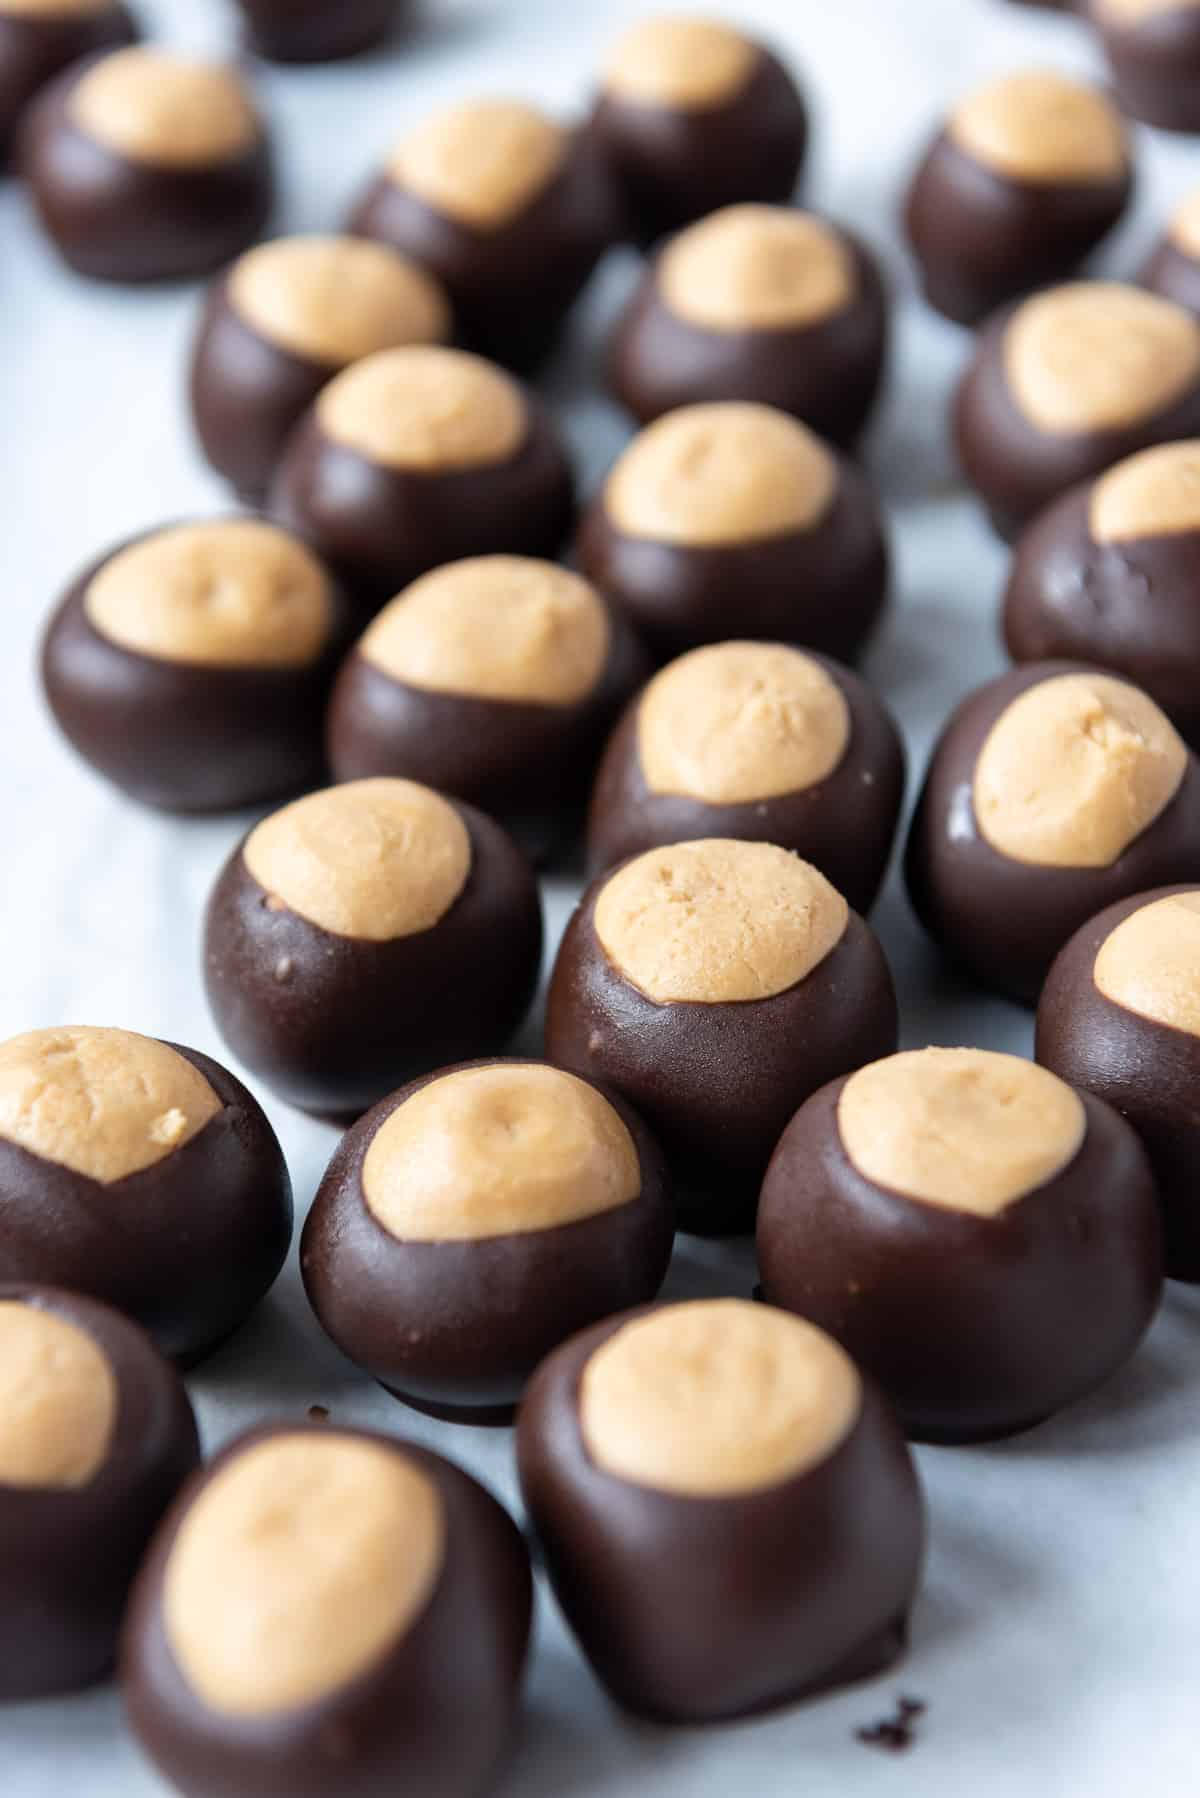 Buckeyes dipped in chocolate setting up on a baking sheet.